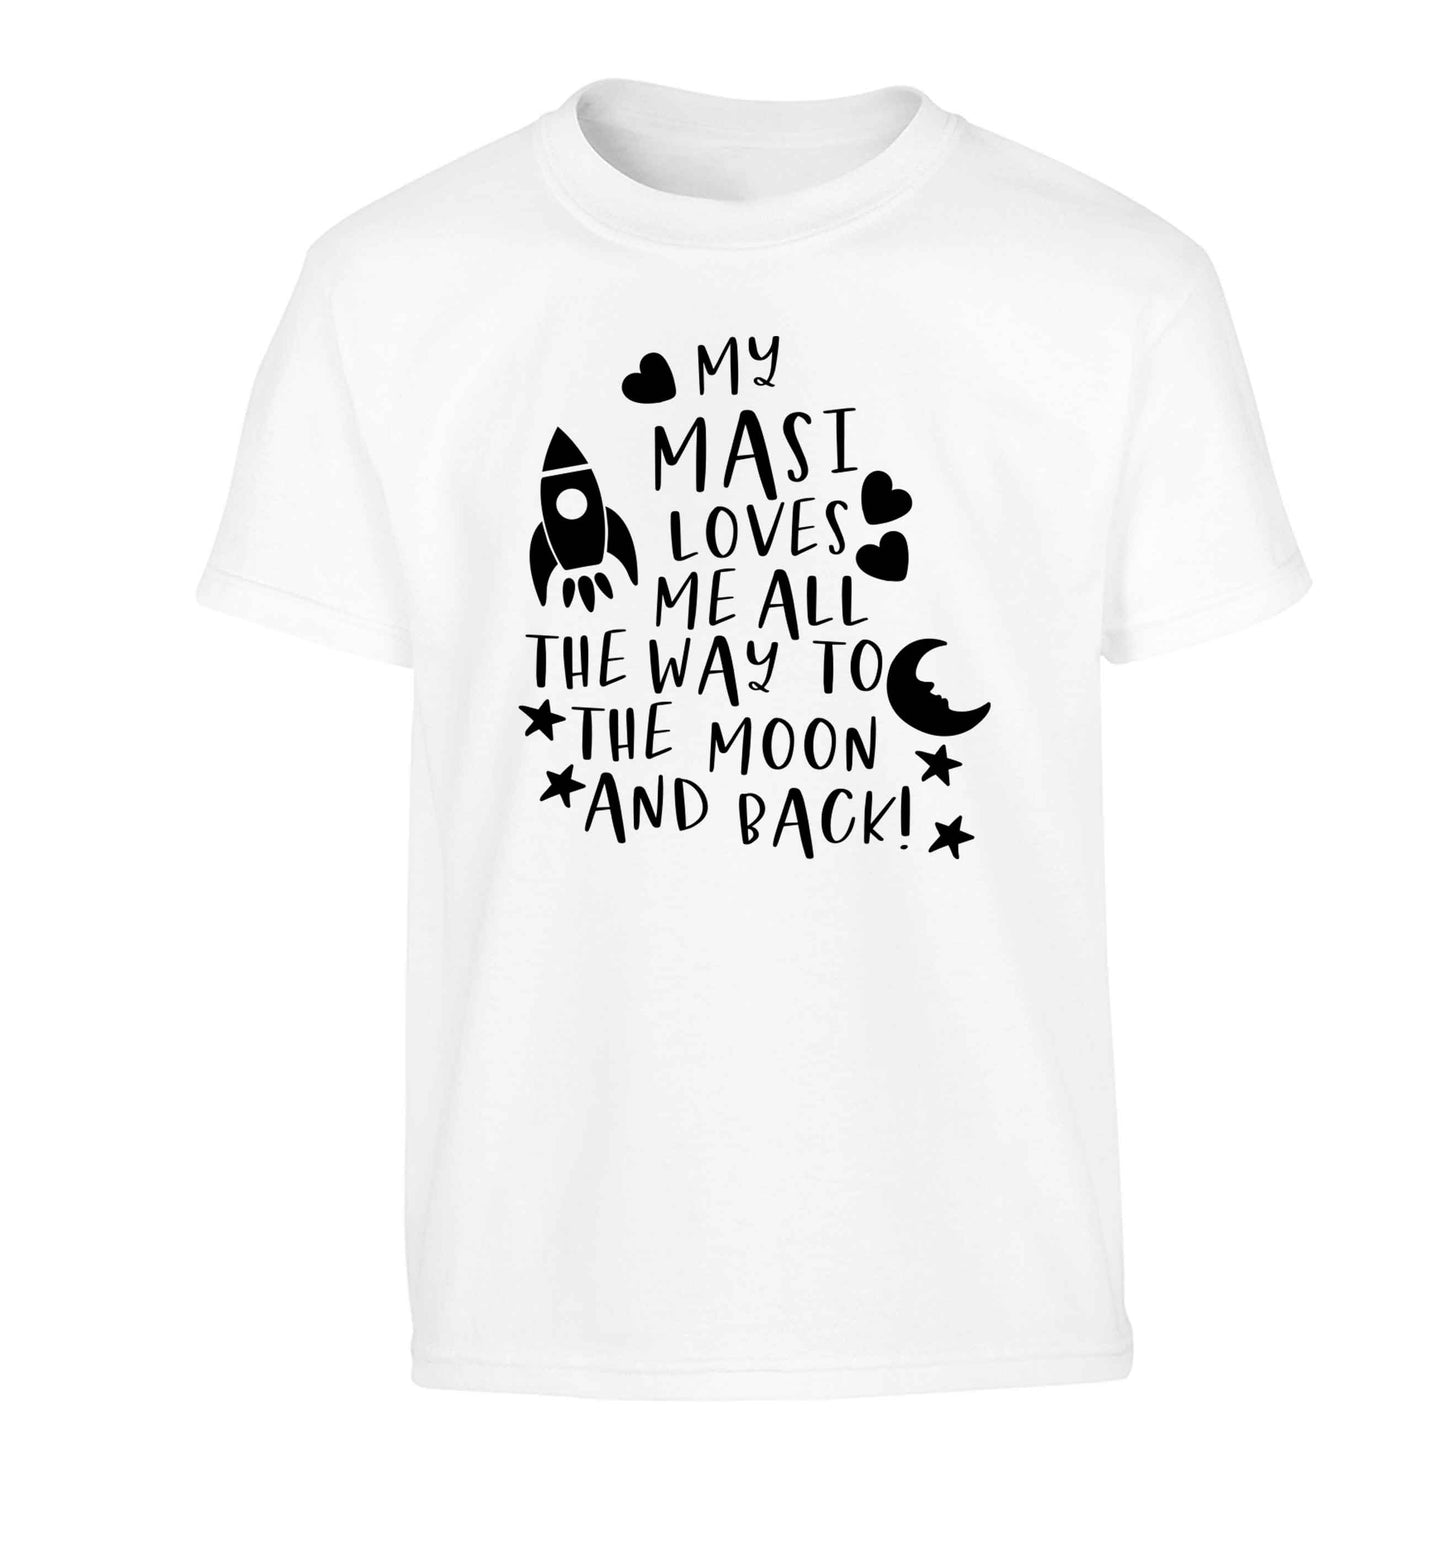 My masi loves me all the way to the moon and back Children's white Tshirt 12-13 Years